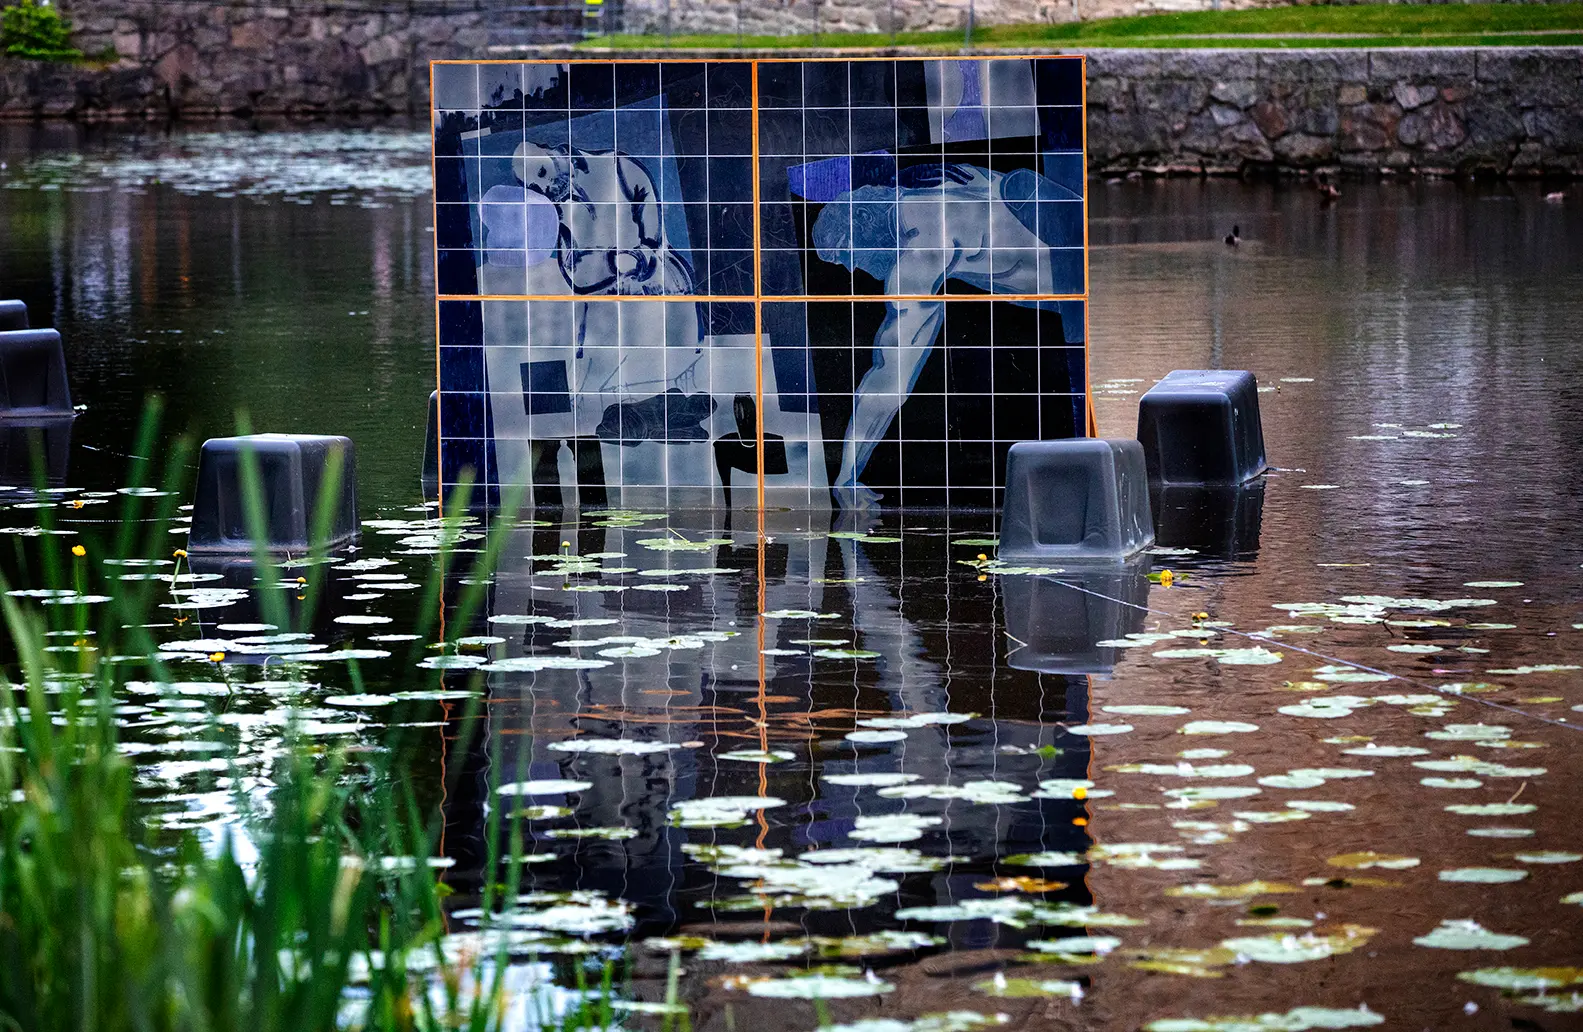 Close-up of one of the paintings made of ceramic tiles in shades of blue that are placed in the water around Örebro Castle.